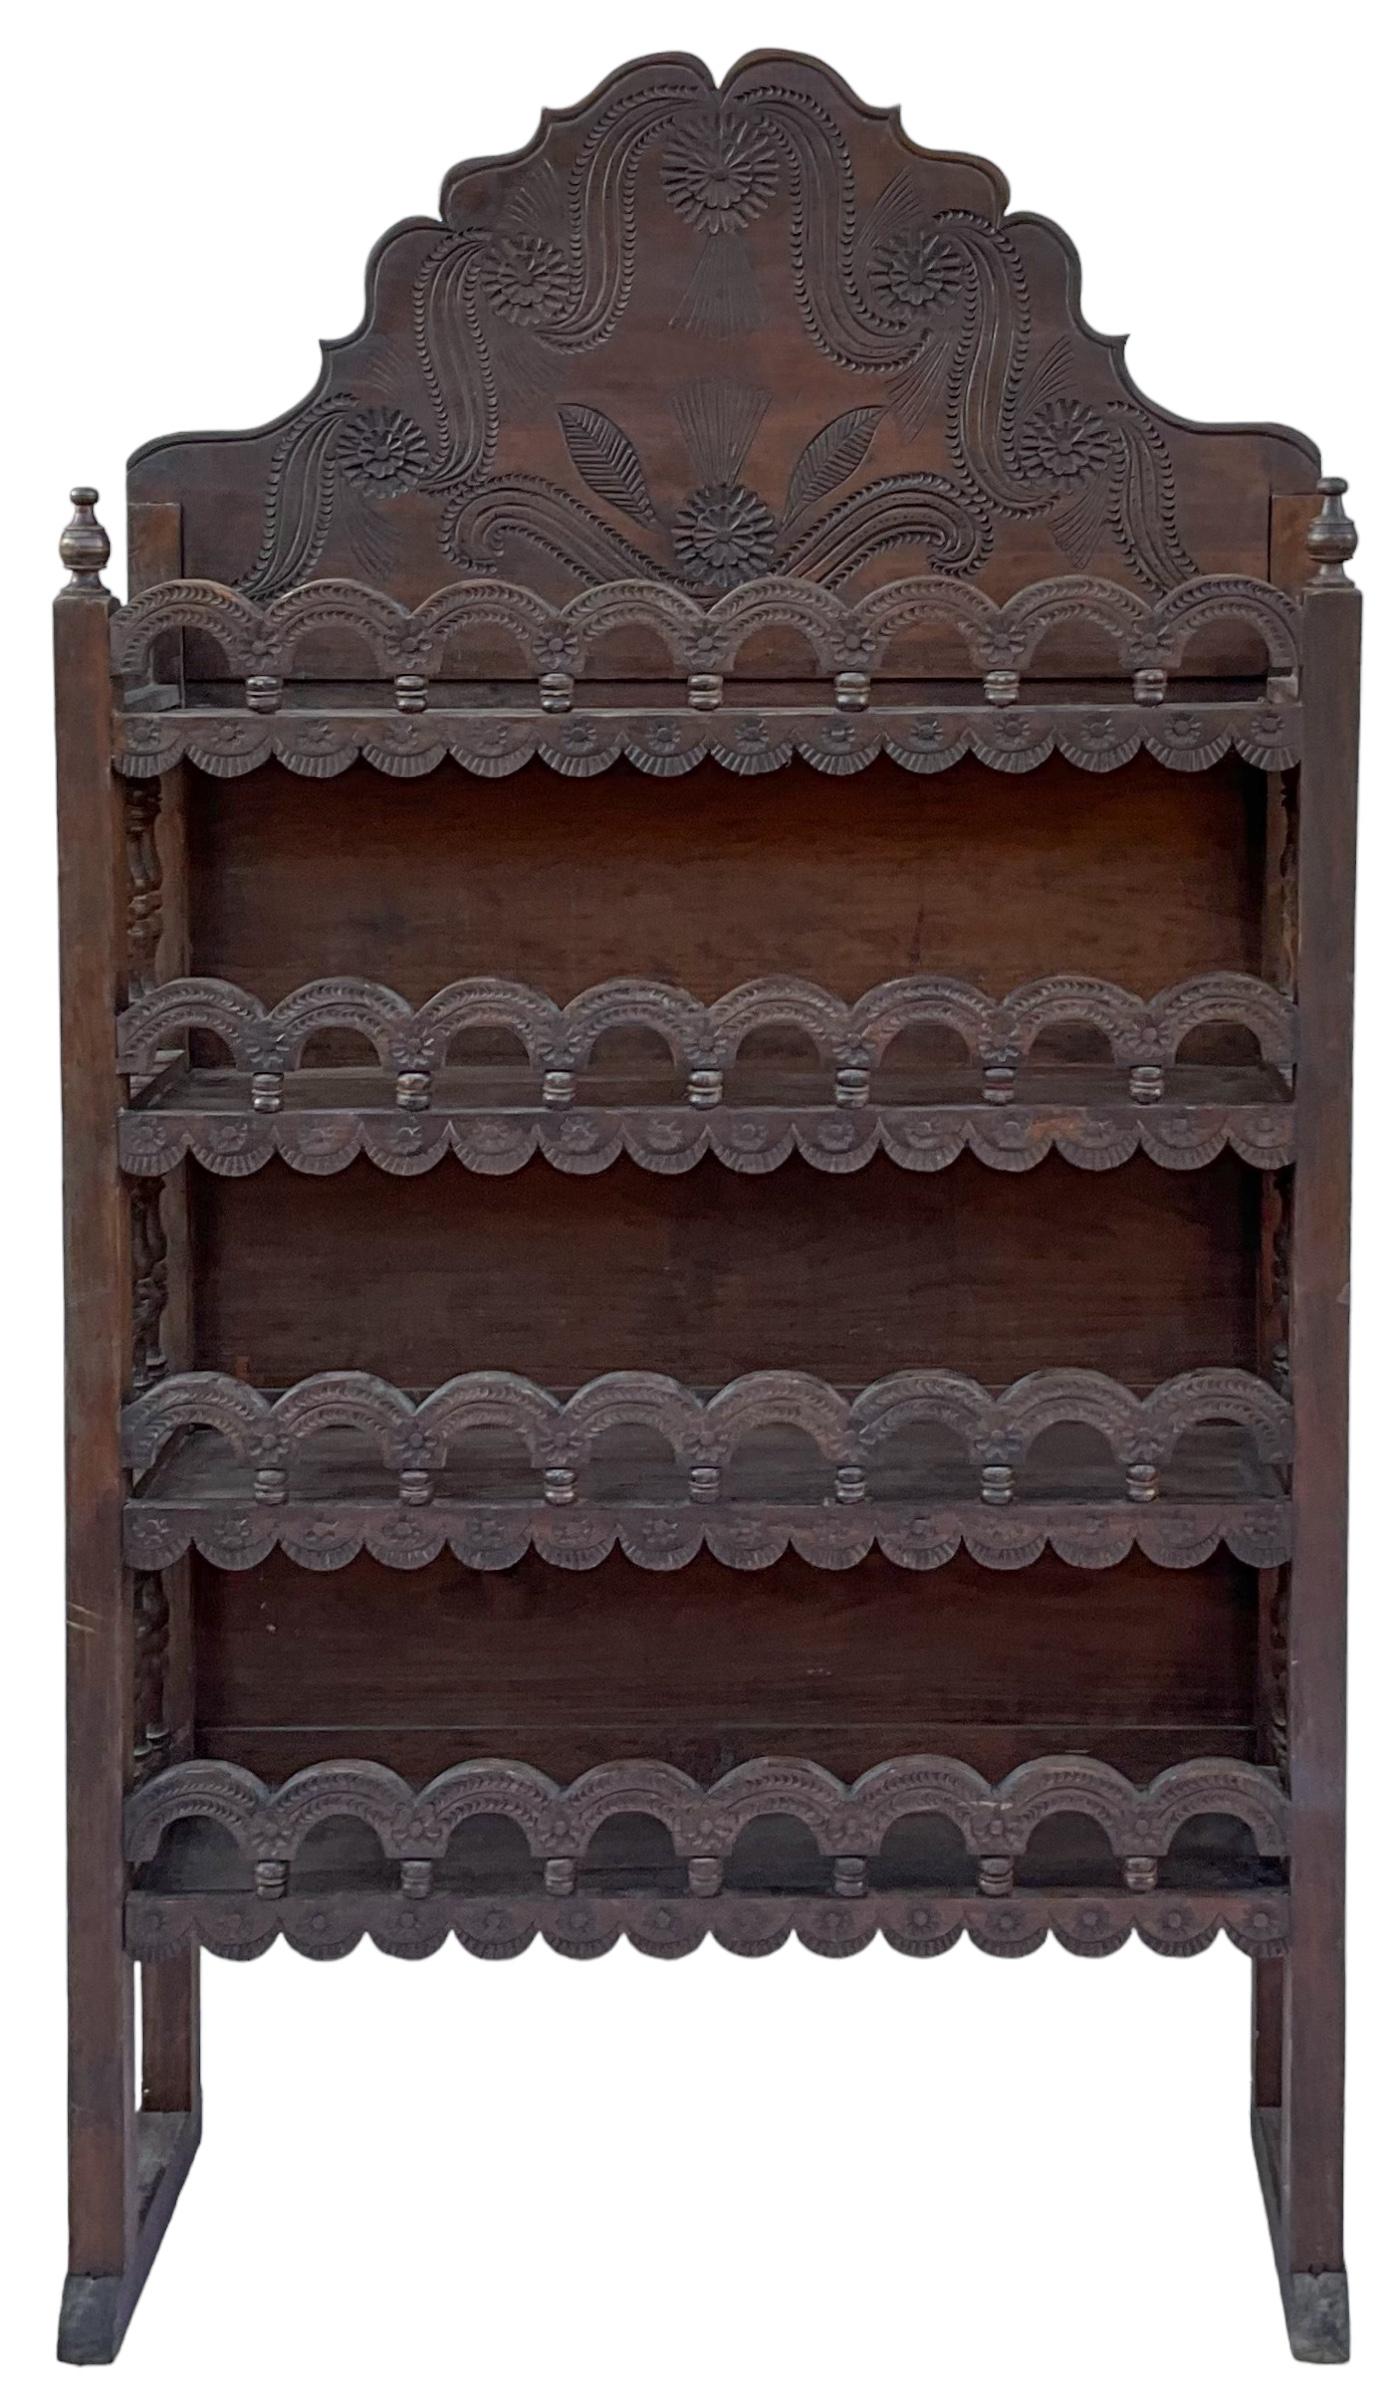 Early 20th-C. Moroccan Heavily Carved Fruitwood Bookcase / Etagere / Shelf In Good Condition For Sale In Kennesaw, GA